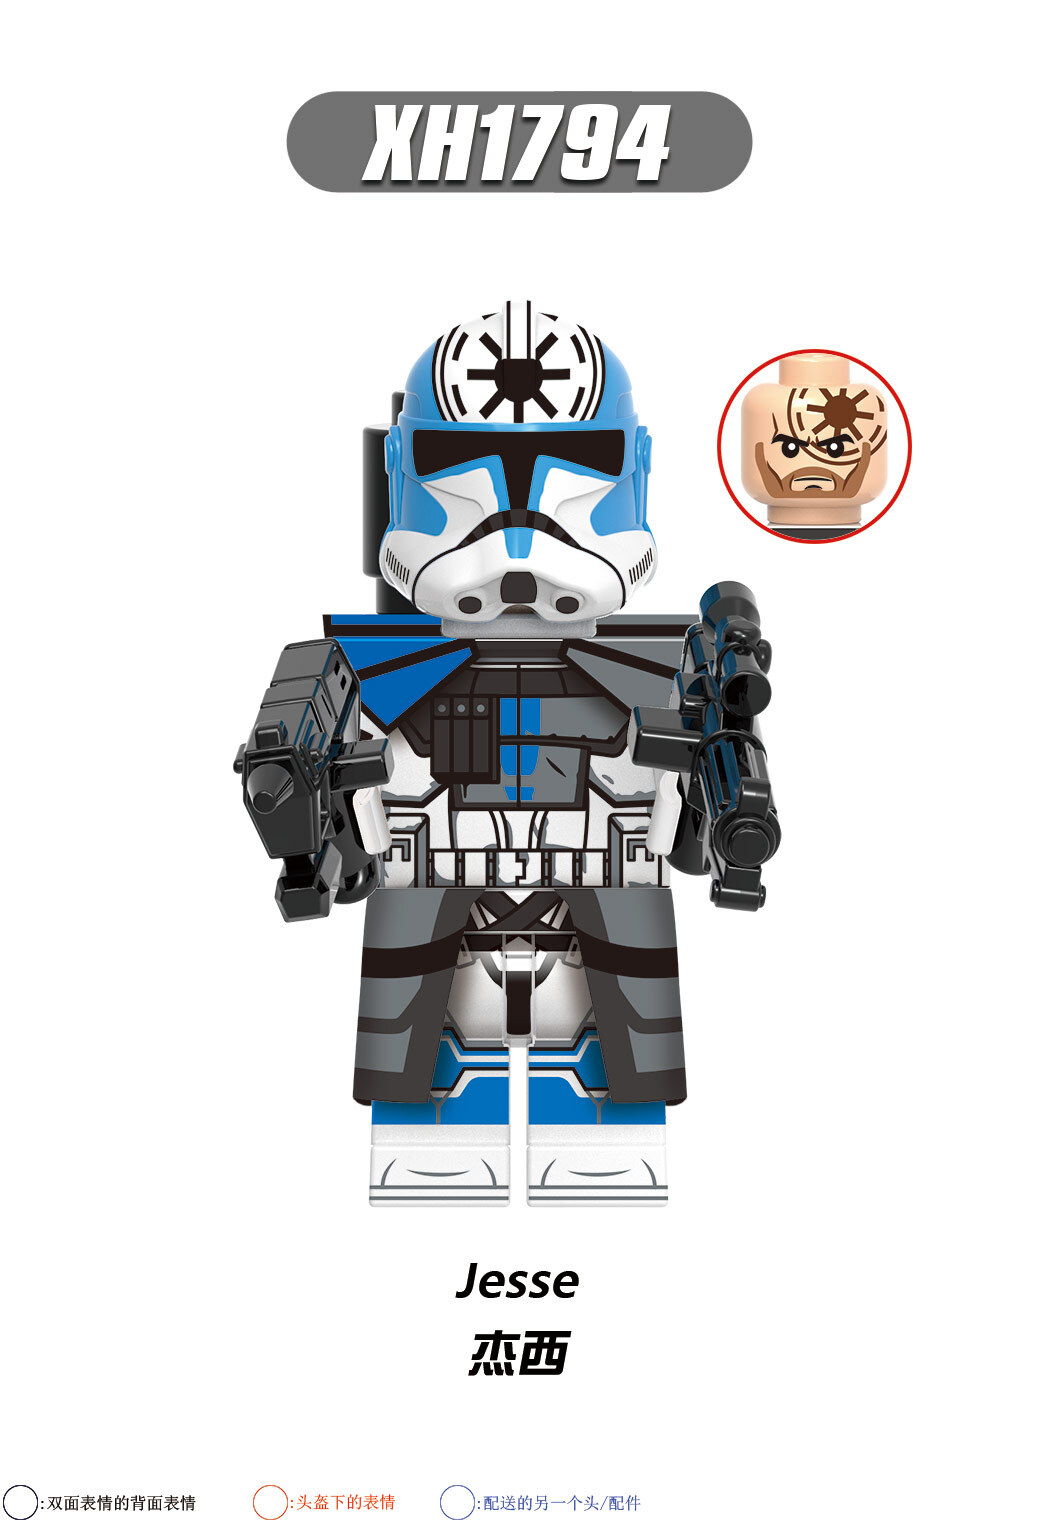 X0323 1794 1795 1796 1797 1798 1799 1800 1801 Star War Movie Series Building Blocks Action Figures Educational Toys For Kids Gifts